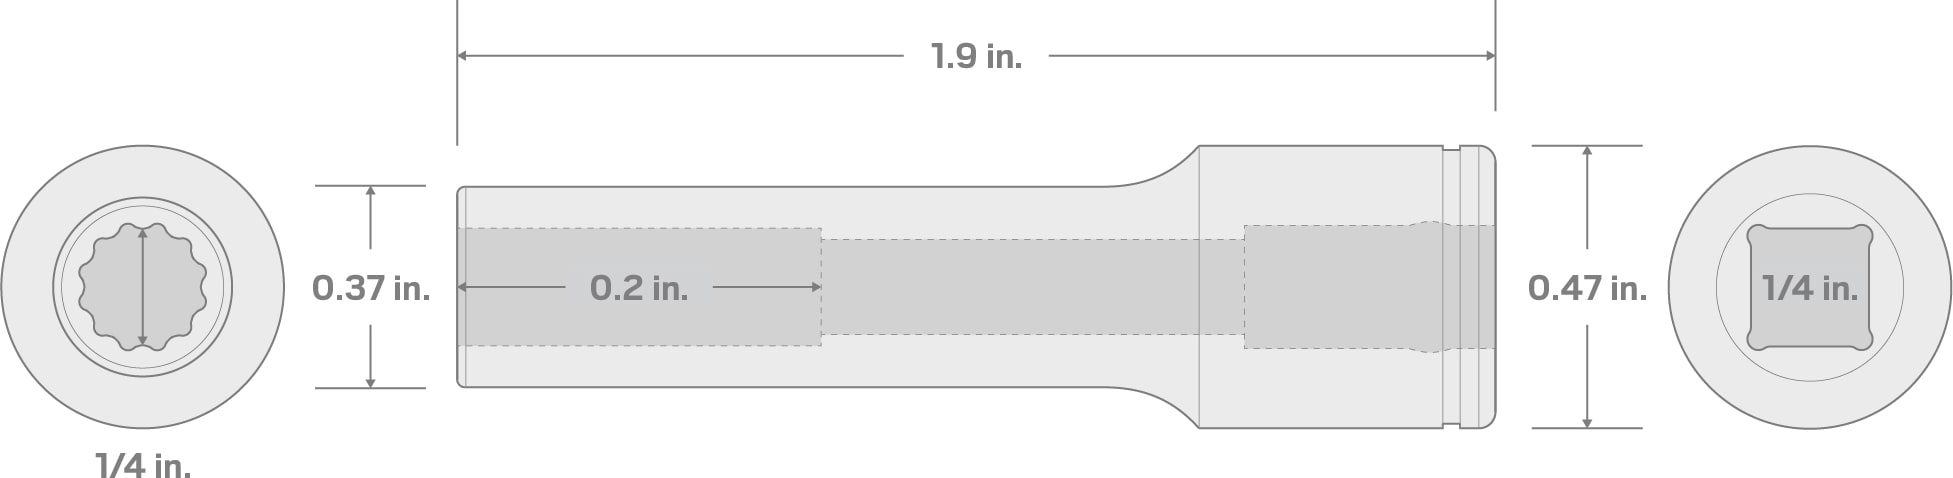 Specs for 1/4 Inch Drive x 1/4 Inch Deep 12-Point Socket